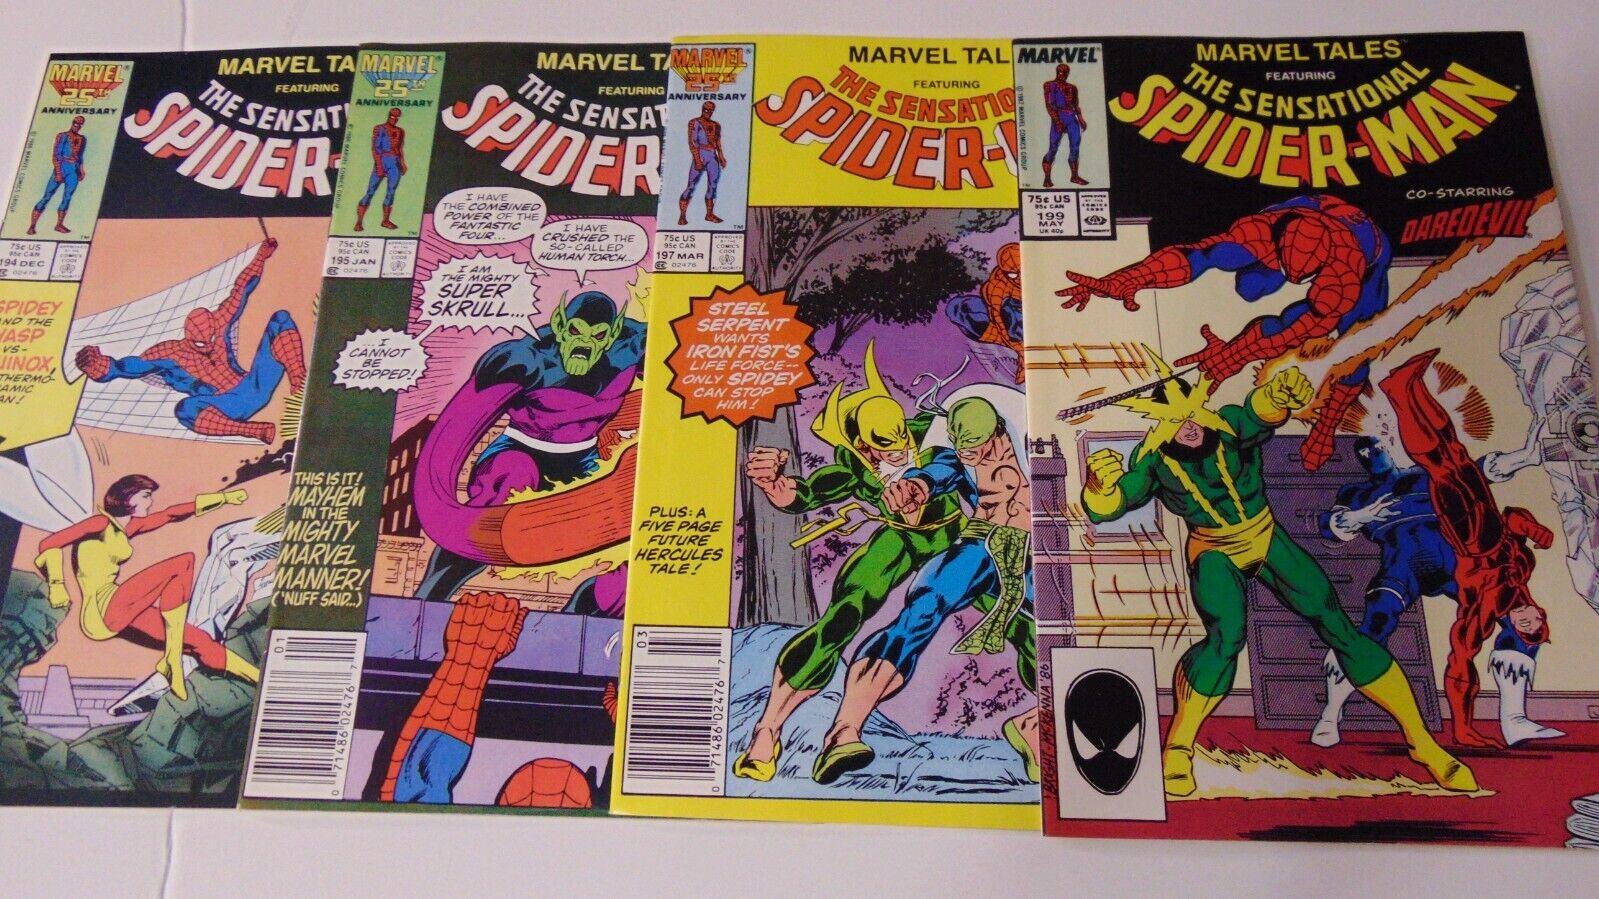 MARVEL TALES SPIDERMAN #194 195 197 199 LOT (1986) CLASSIC BYRNE TEAM-UP